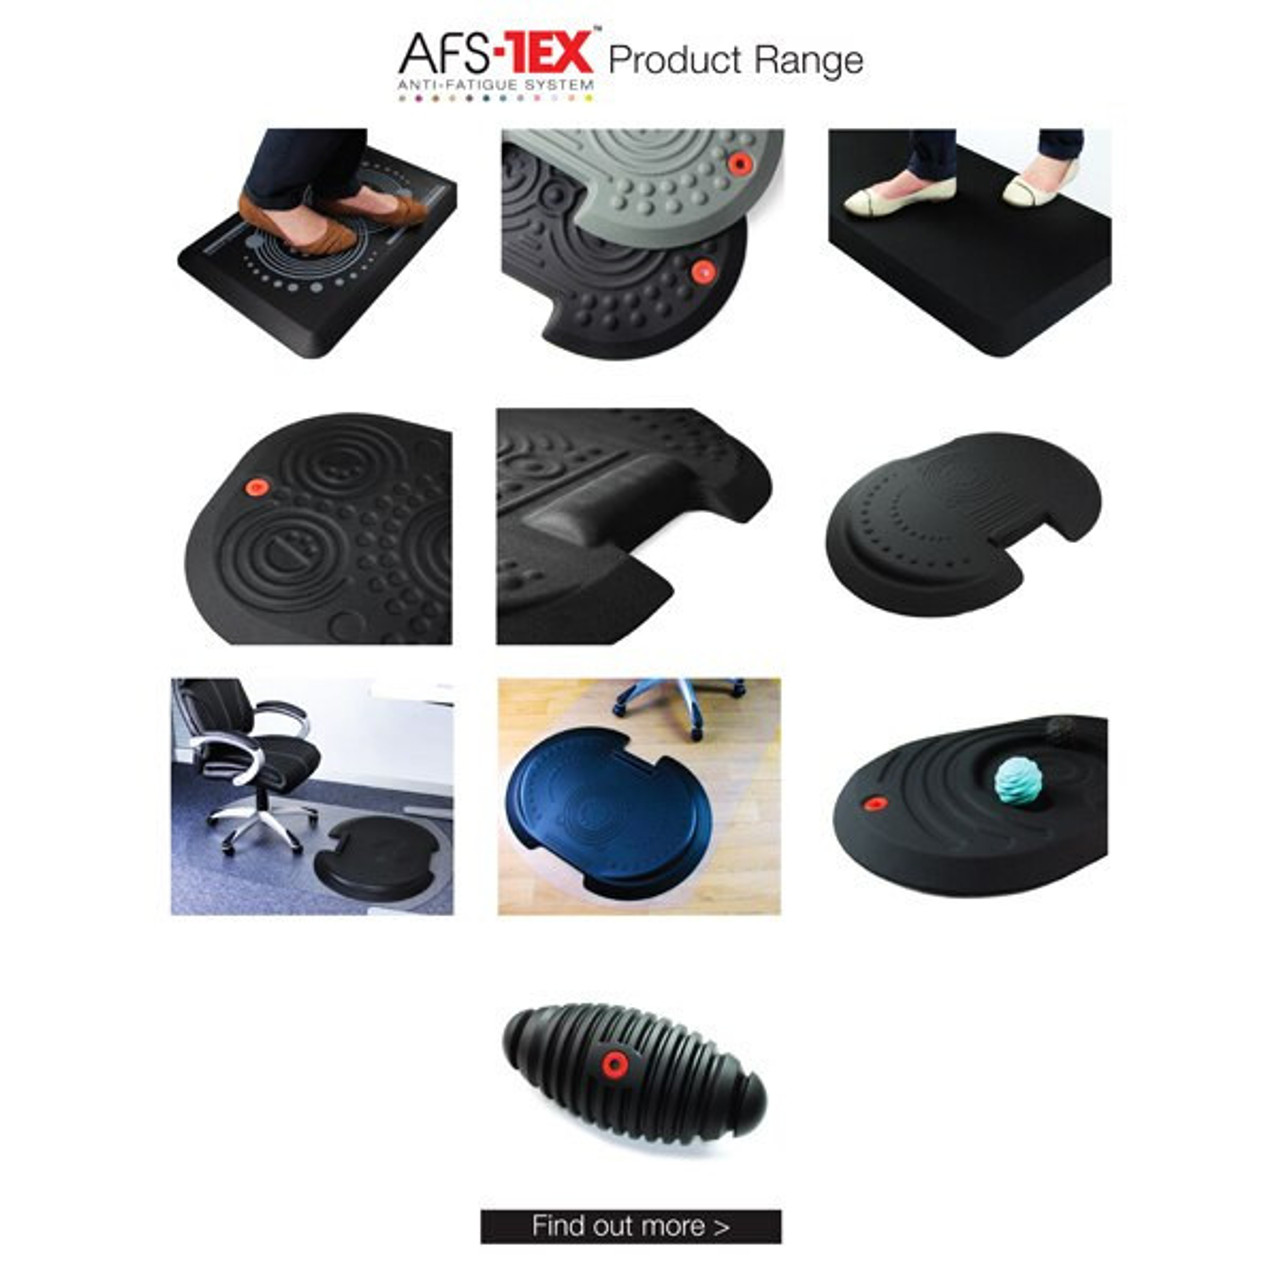 https://cdn11.bigcommerce.com/s-fjwps1jbkv/images/stencil/1280x1280/products/273/3463/afs-tex-dynamic-active-foot-rest-or-ergonomic-footrest-for-active-offices__03945.1688991986.jpg?c=2?imbypass=on